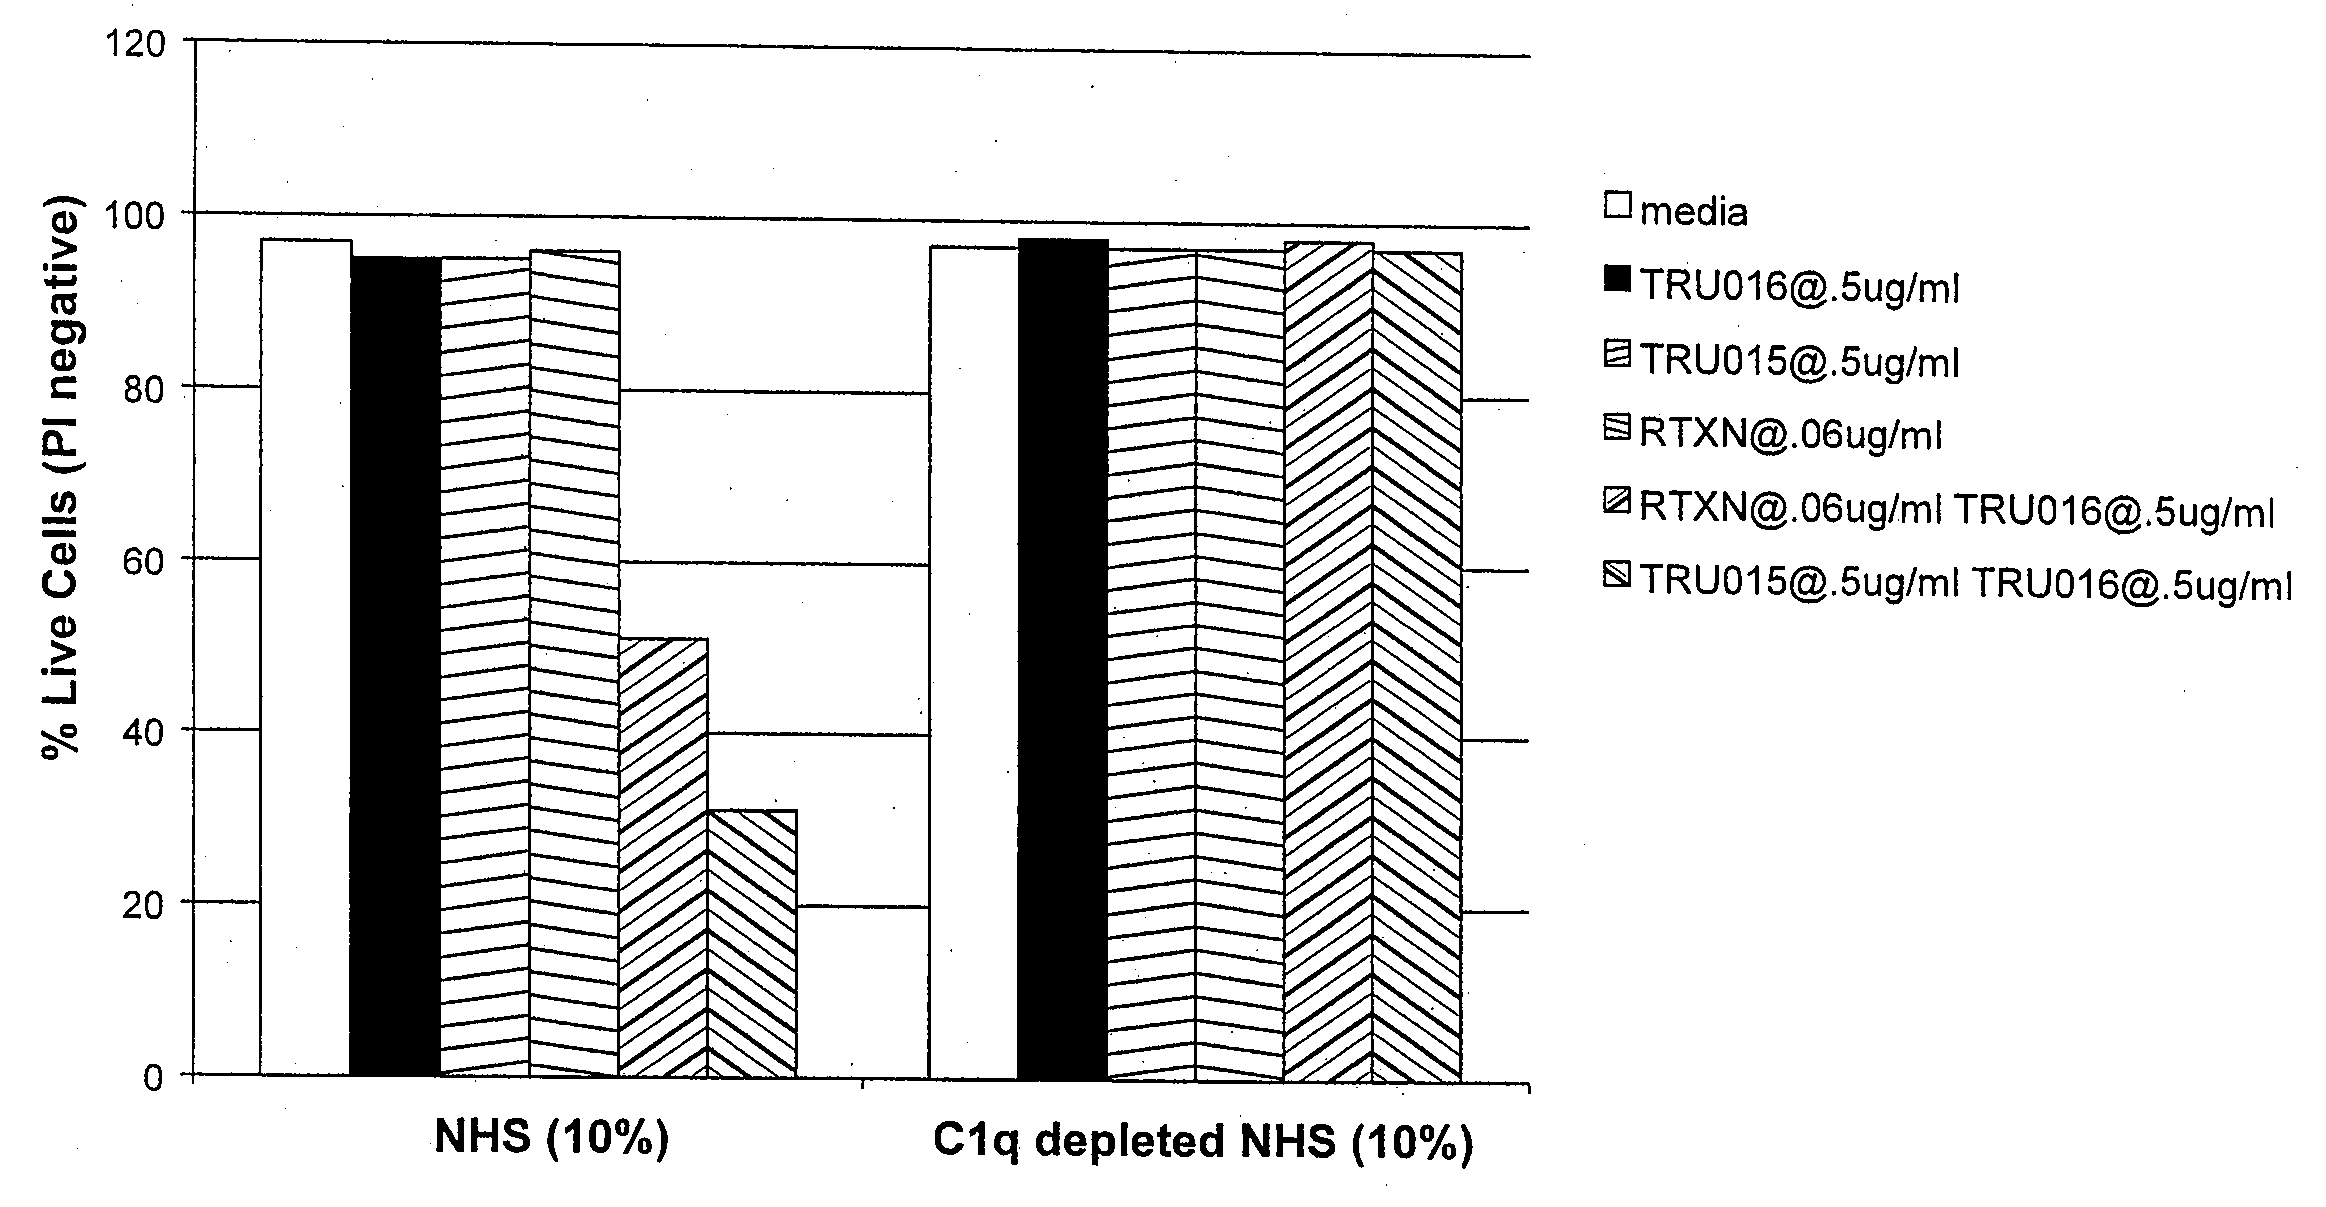 B-cell reduction using cd37-specific and cd20-specific binding molecules